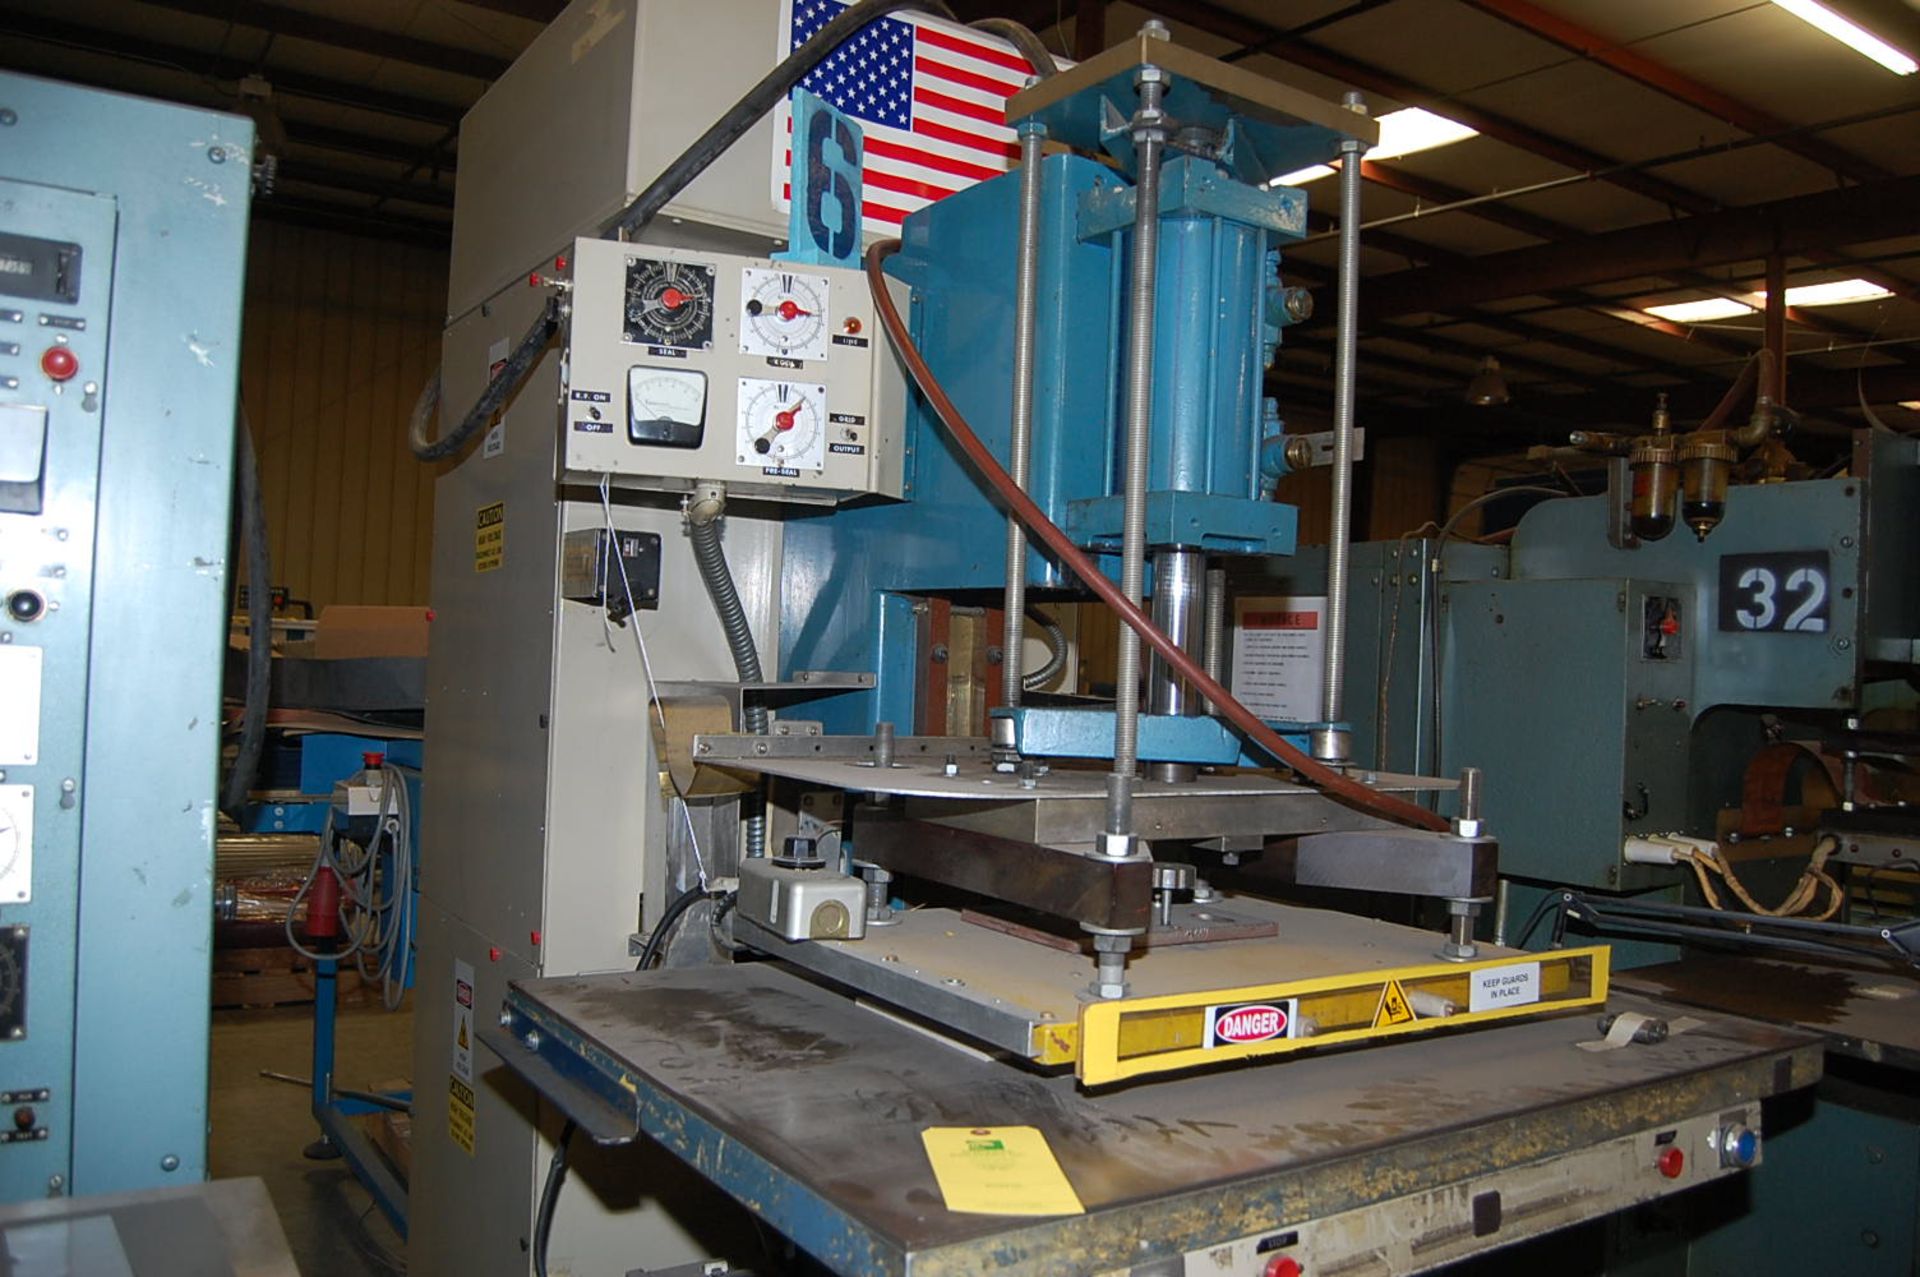 Thermatron/Solidyne Model #F10-25 Sealing Press, 24 in. x 18 in. Heated Platen, Serial #3031F75 - Image 2 of 2